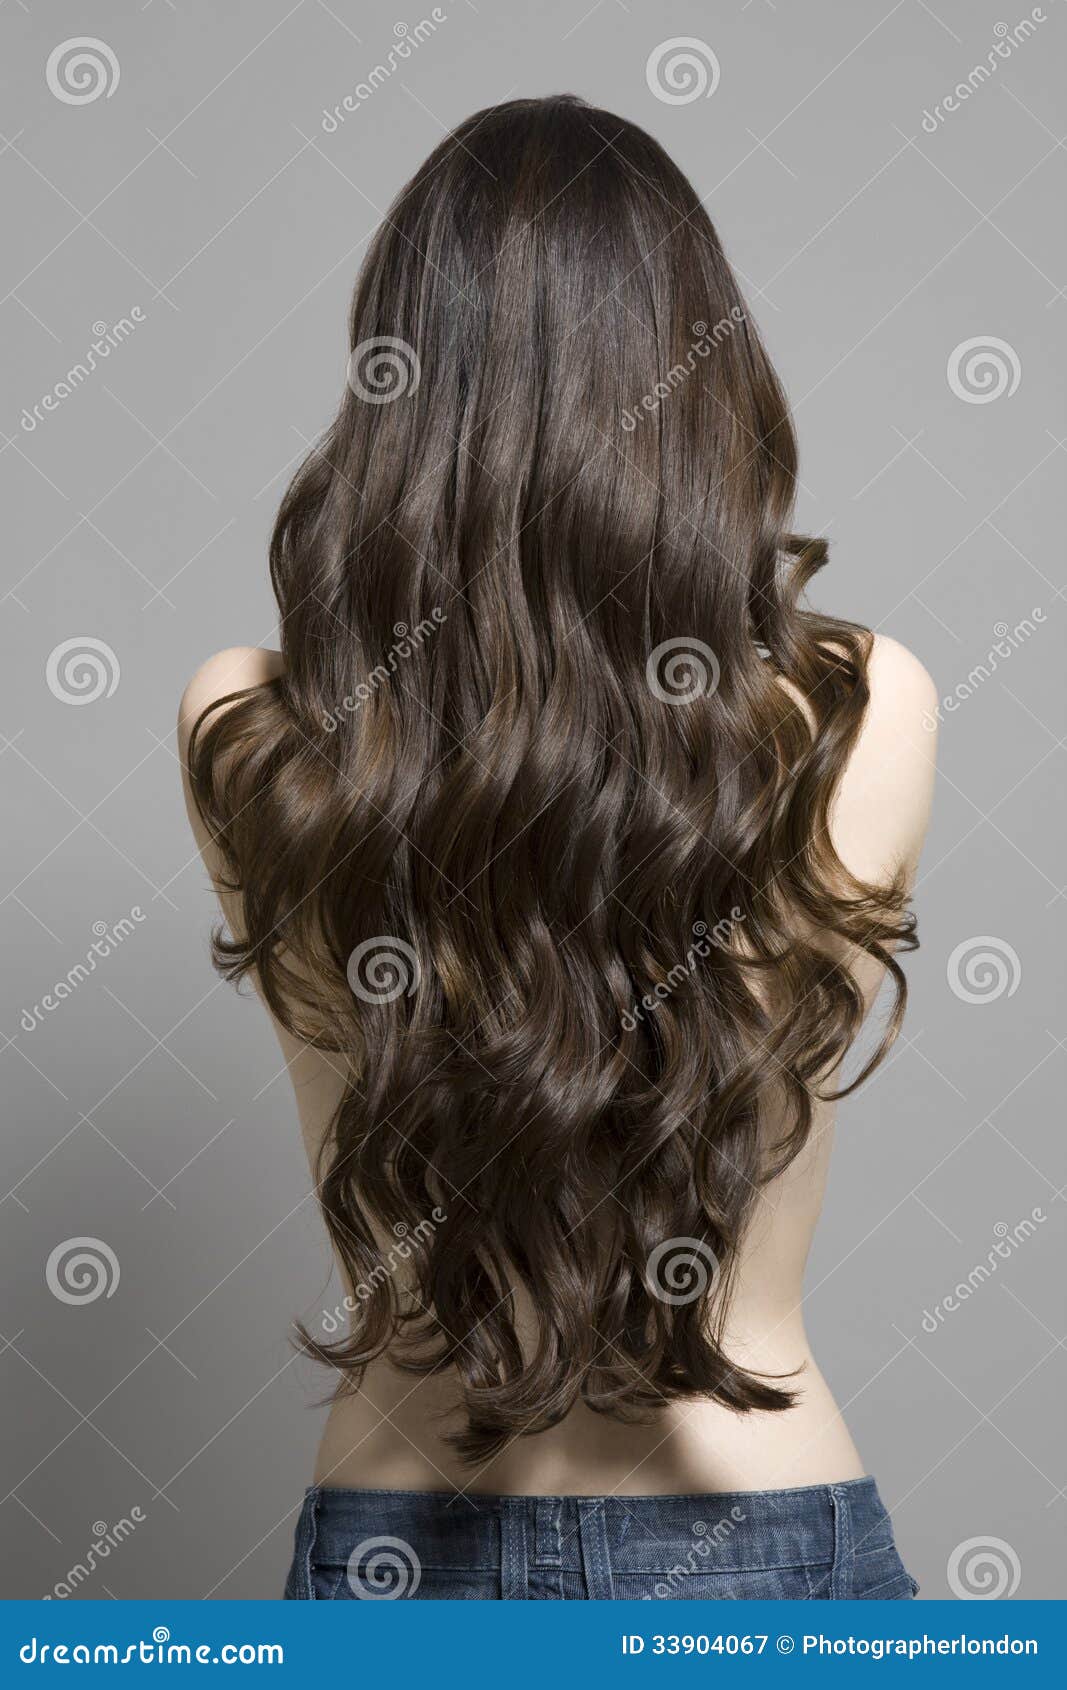 4,579 Woman Beautiful Long Hair Rear View Stock Photos - Free &  Royalty-Free Stock Photos from Dreamstime